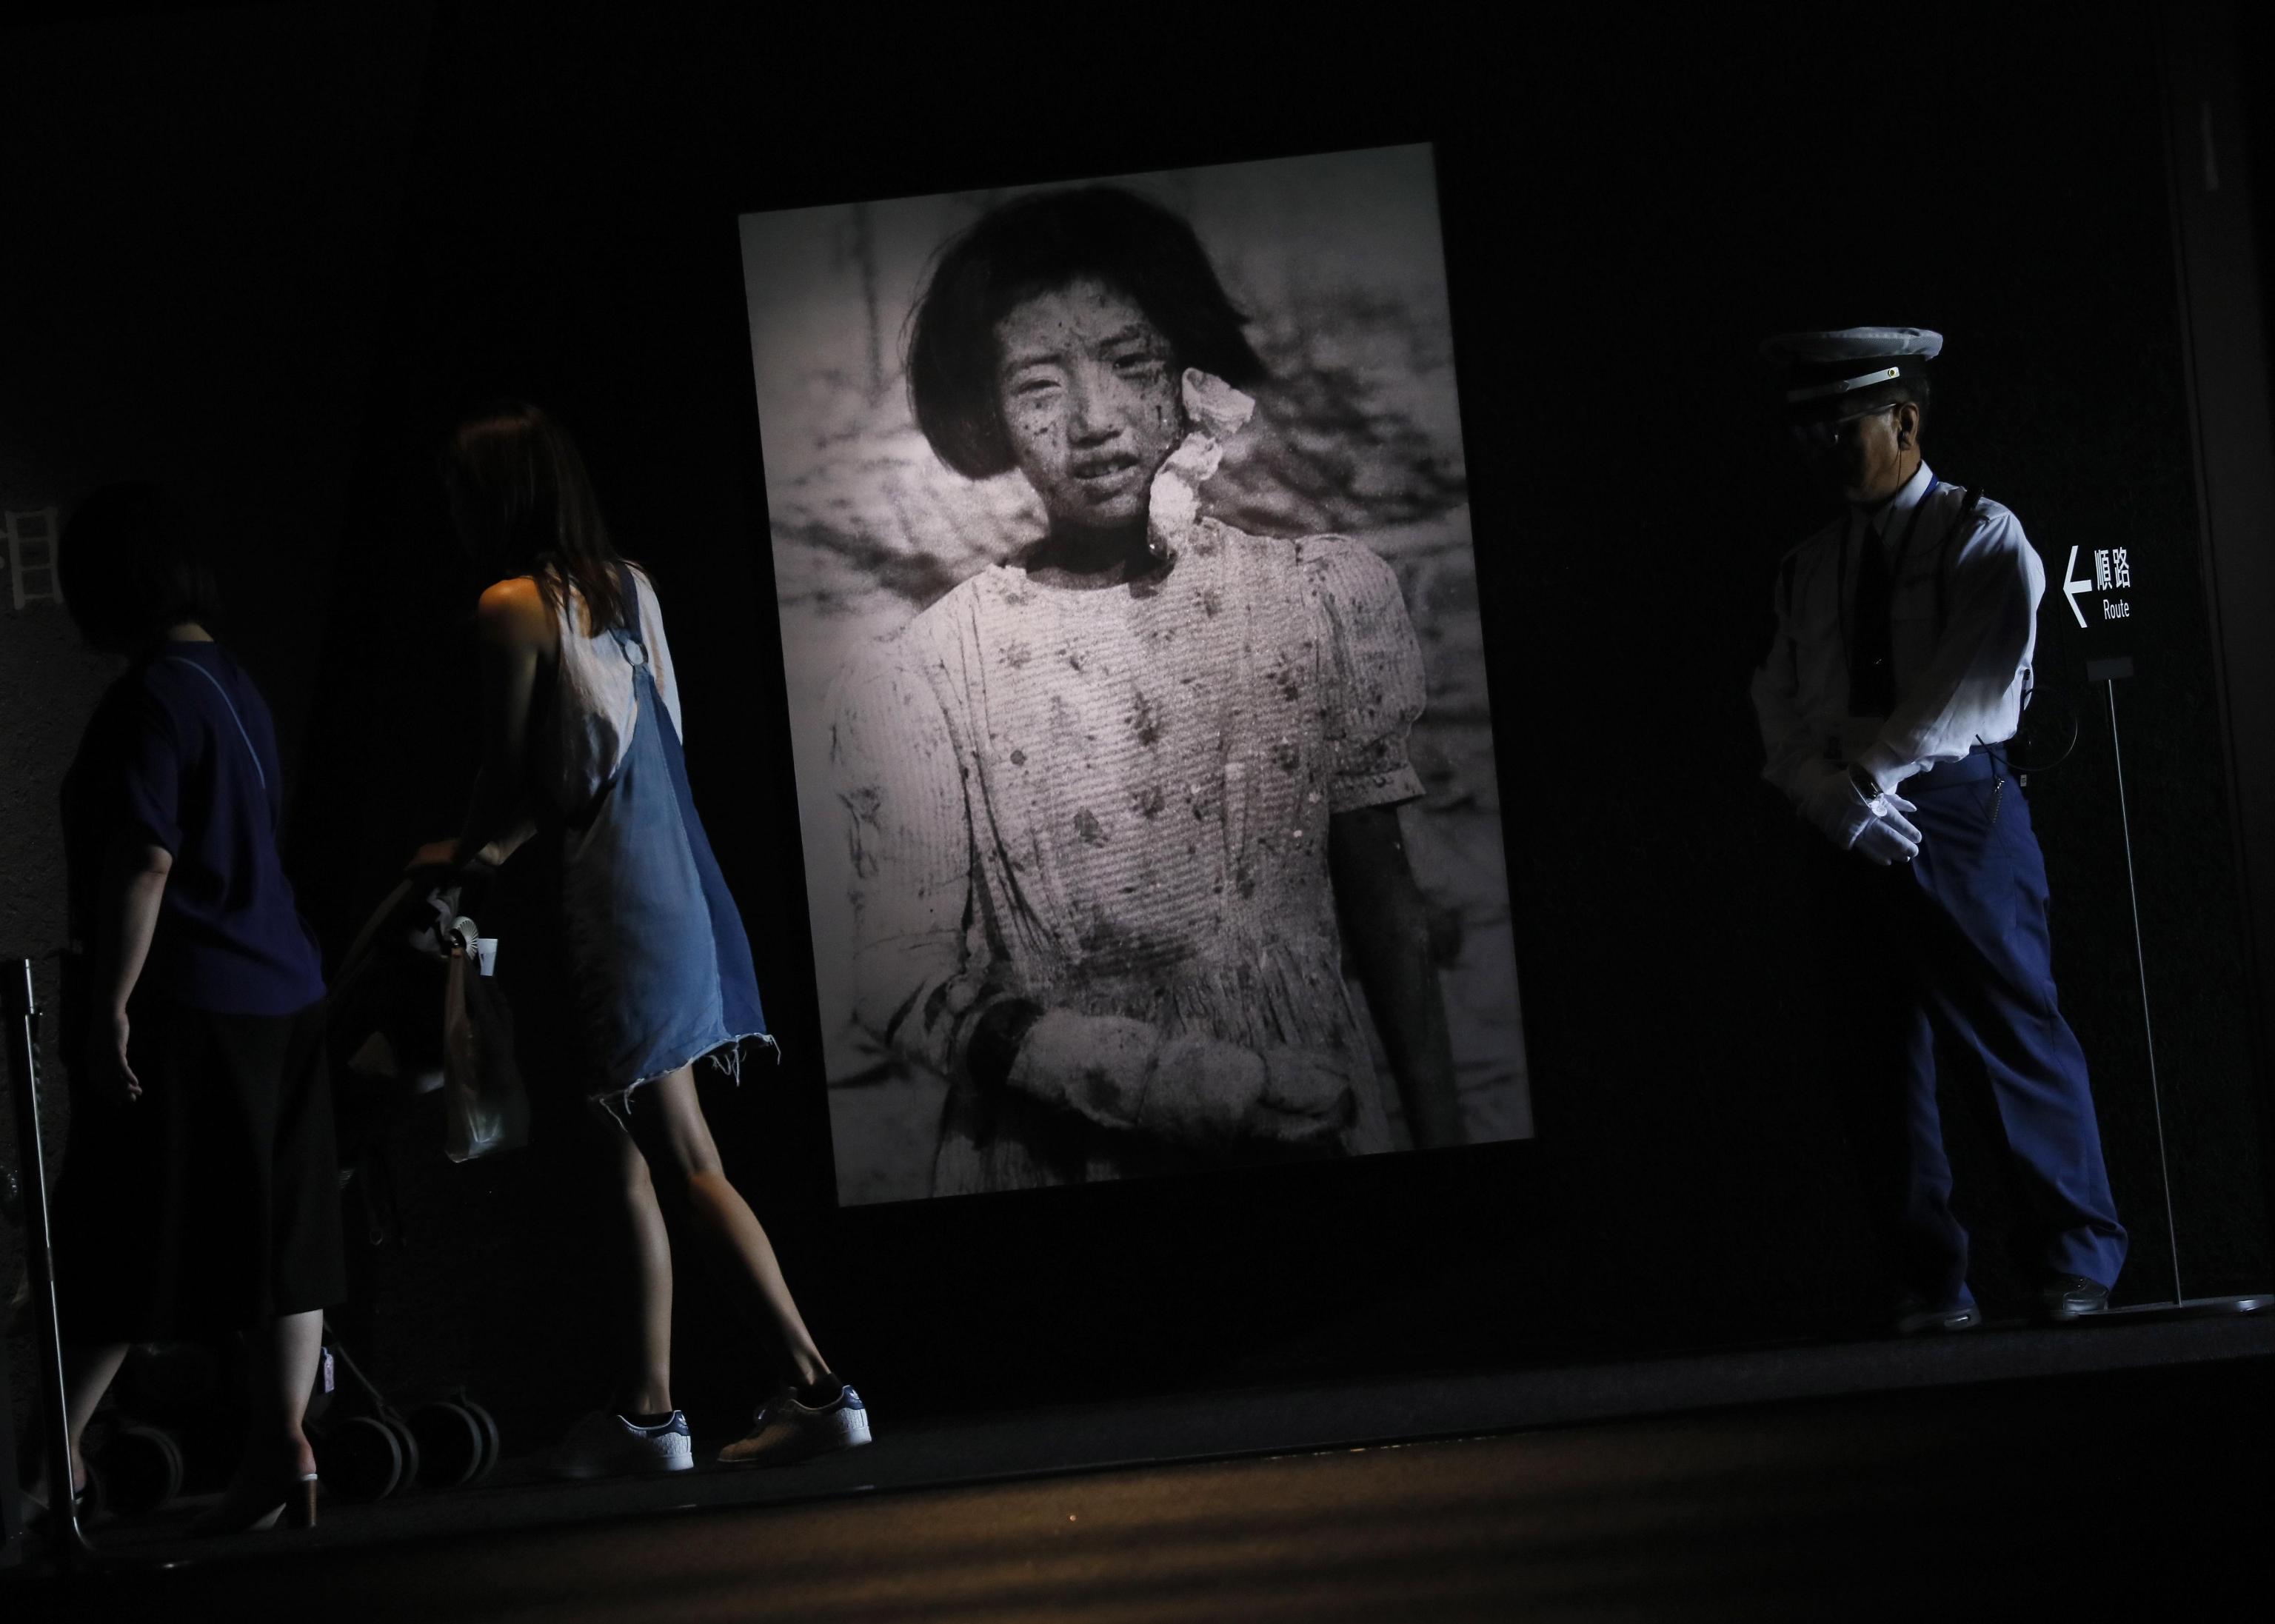 epa07839166 (FILE) - Visitors walking through a photo of 10-year-old atomic bomb survivor girl Yukio Fujii, whose photo was taken on 09 August 1945, just three days after the atomic bombing, at Hiroshima Peace Memorial Museum  in Hiroshima, western Japan, 17 July 2019. The Vatican announced on 13 September 2019 Pope Francis will visit Japan from 23 to 26 November and the WWII atomic bombed cities of Hiroshima Nagasaki. The Pope's visit to Japan will be for the first time since John Paul II visited in 1981. Fuji died at the age of 42 in 1977.  EPA/KIMIMASA MAYAMA